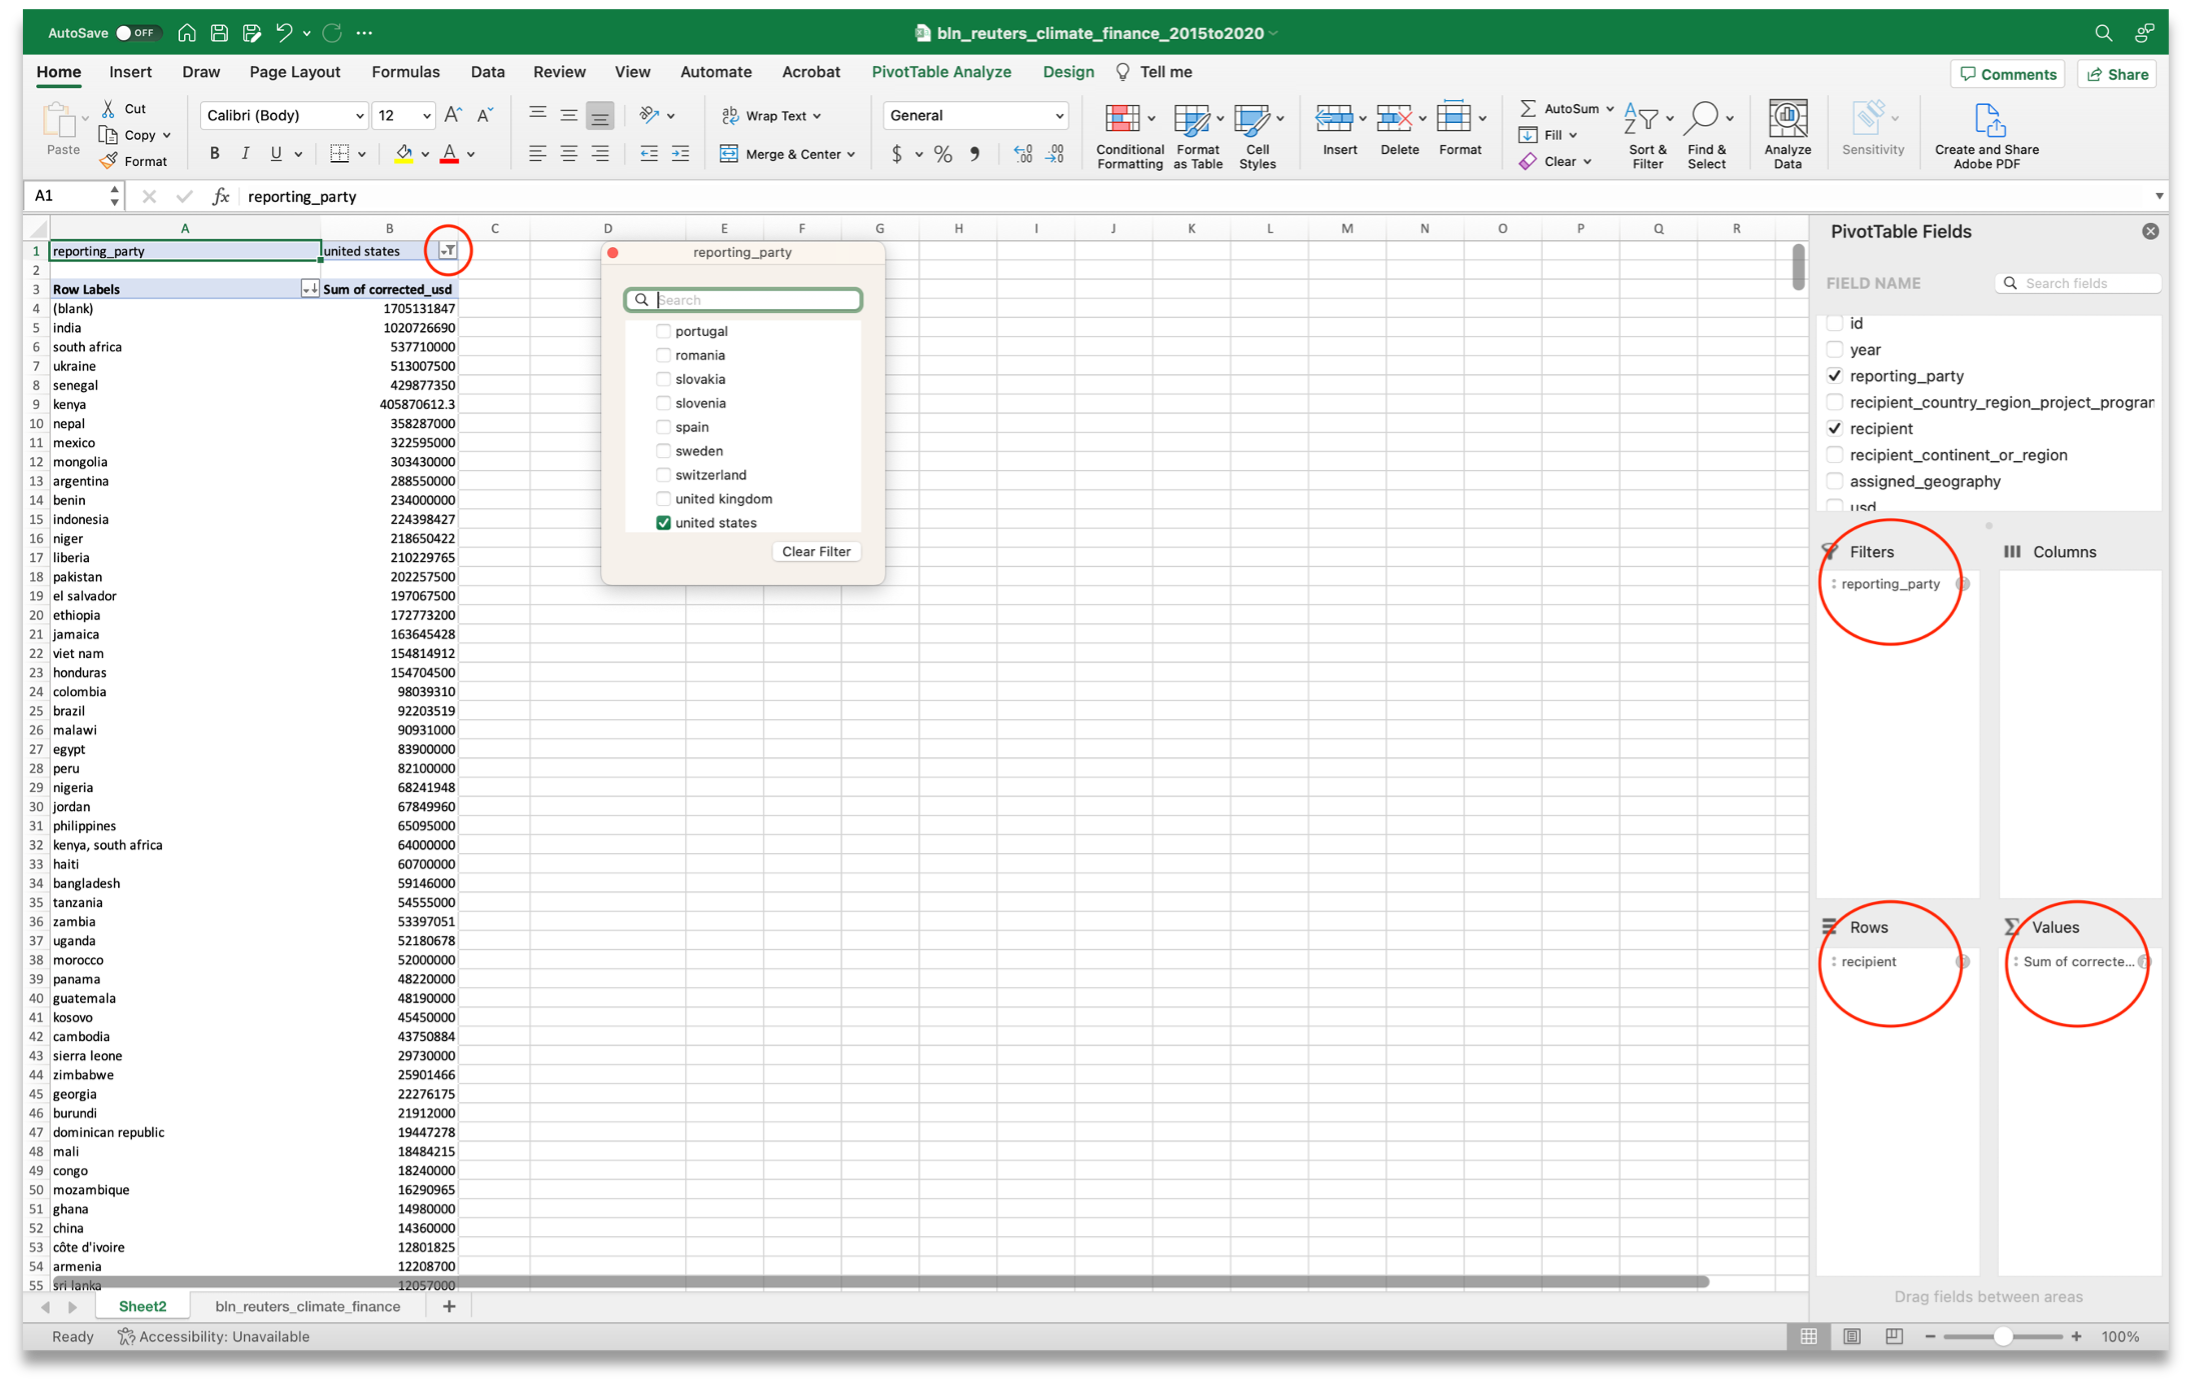 New 'PivotTable' for USA